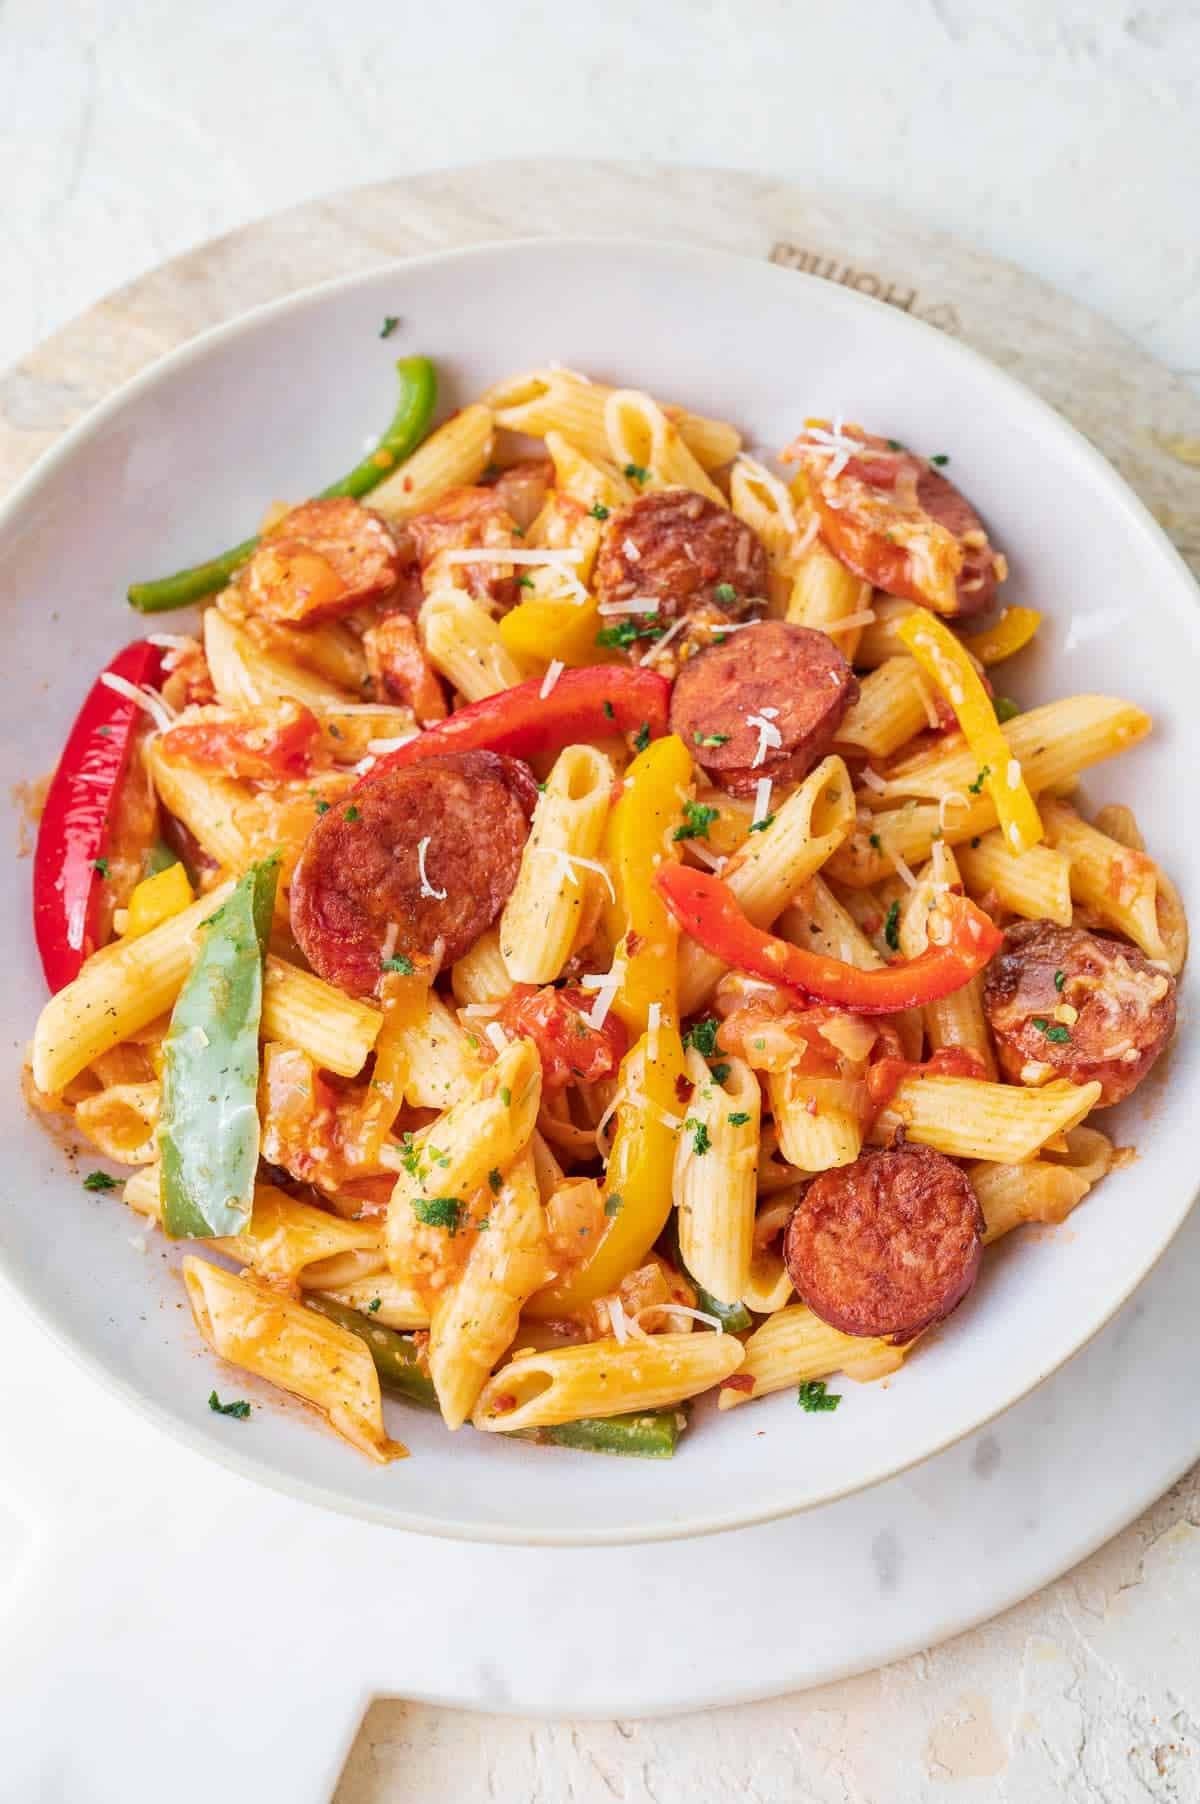 Delicious penne pasta dish featuring sausage and peppers served on a white plate.